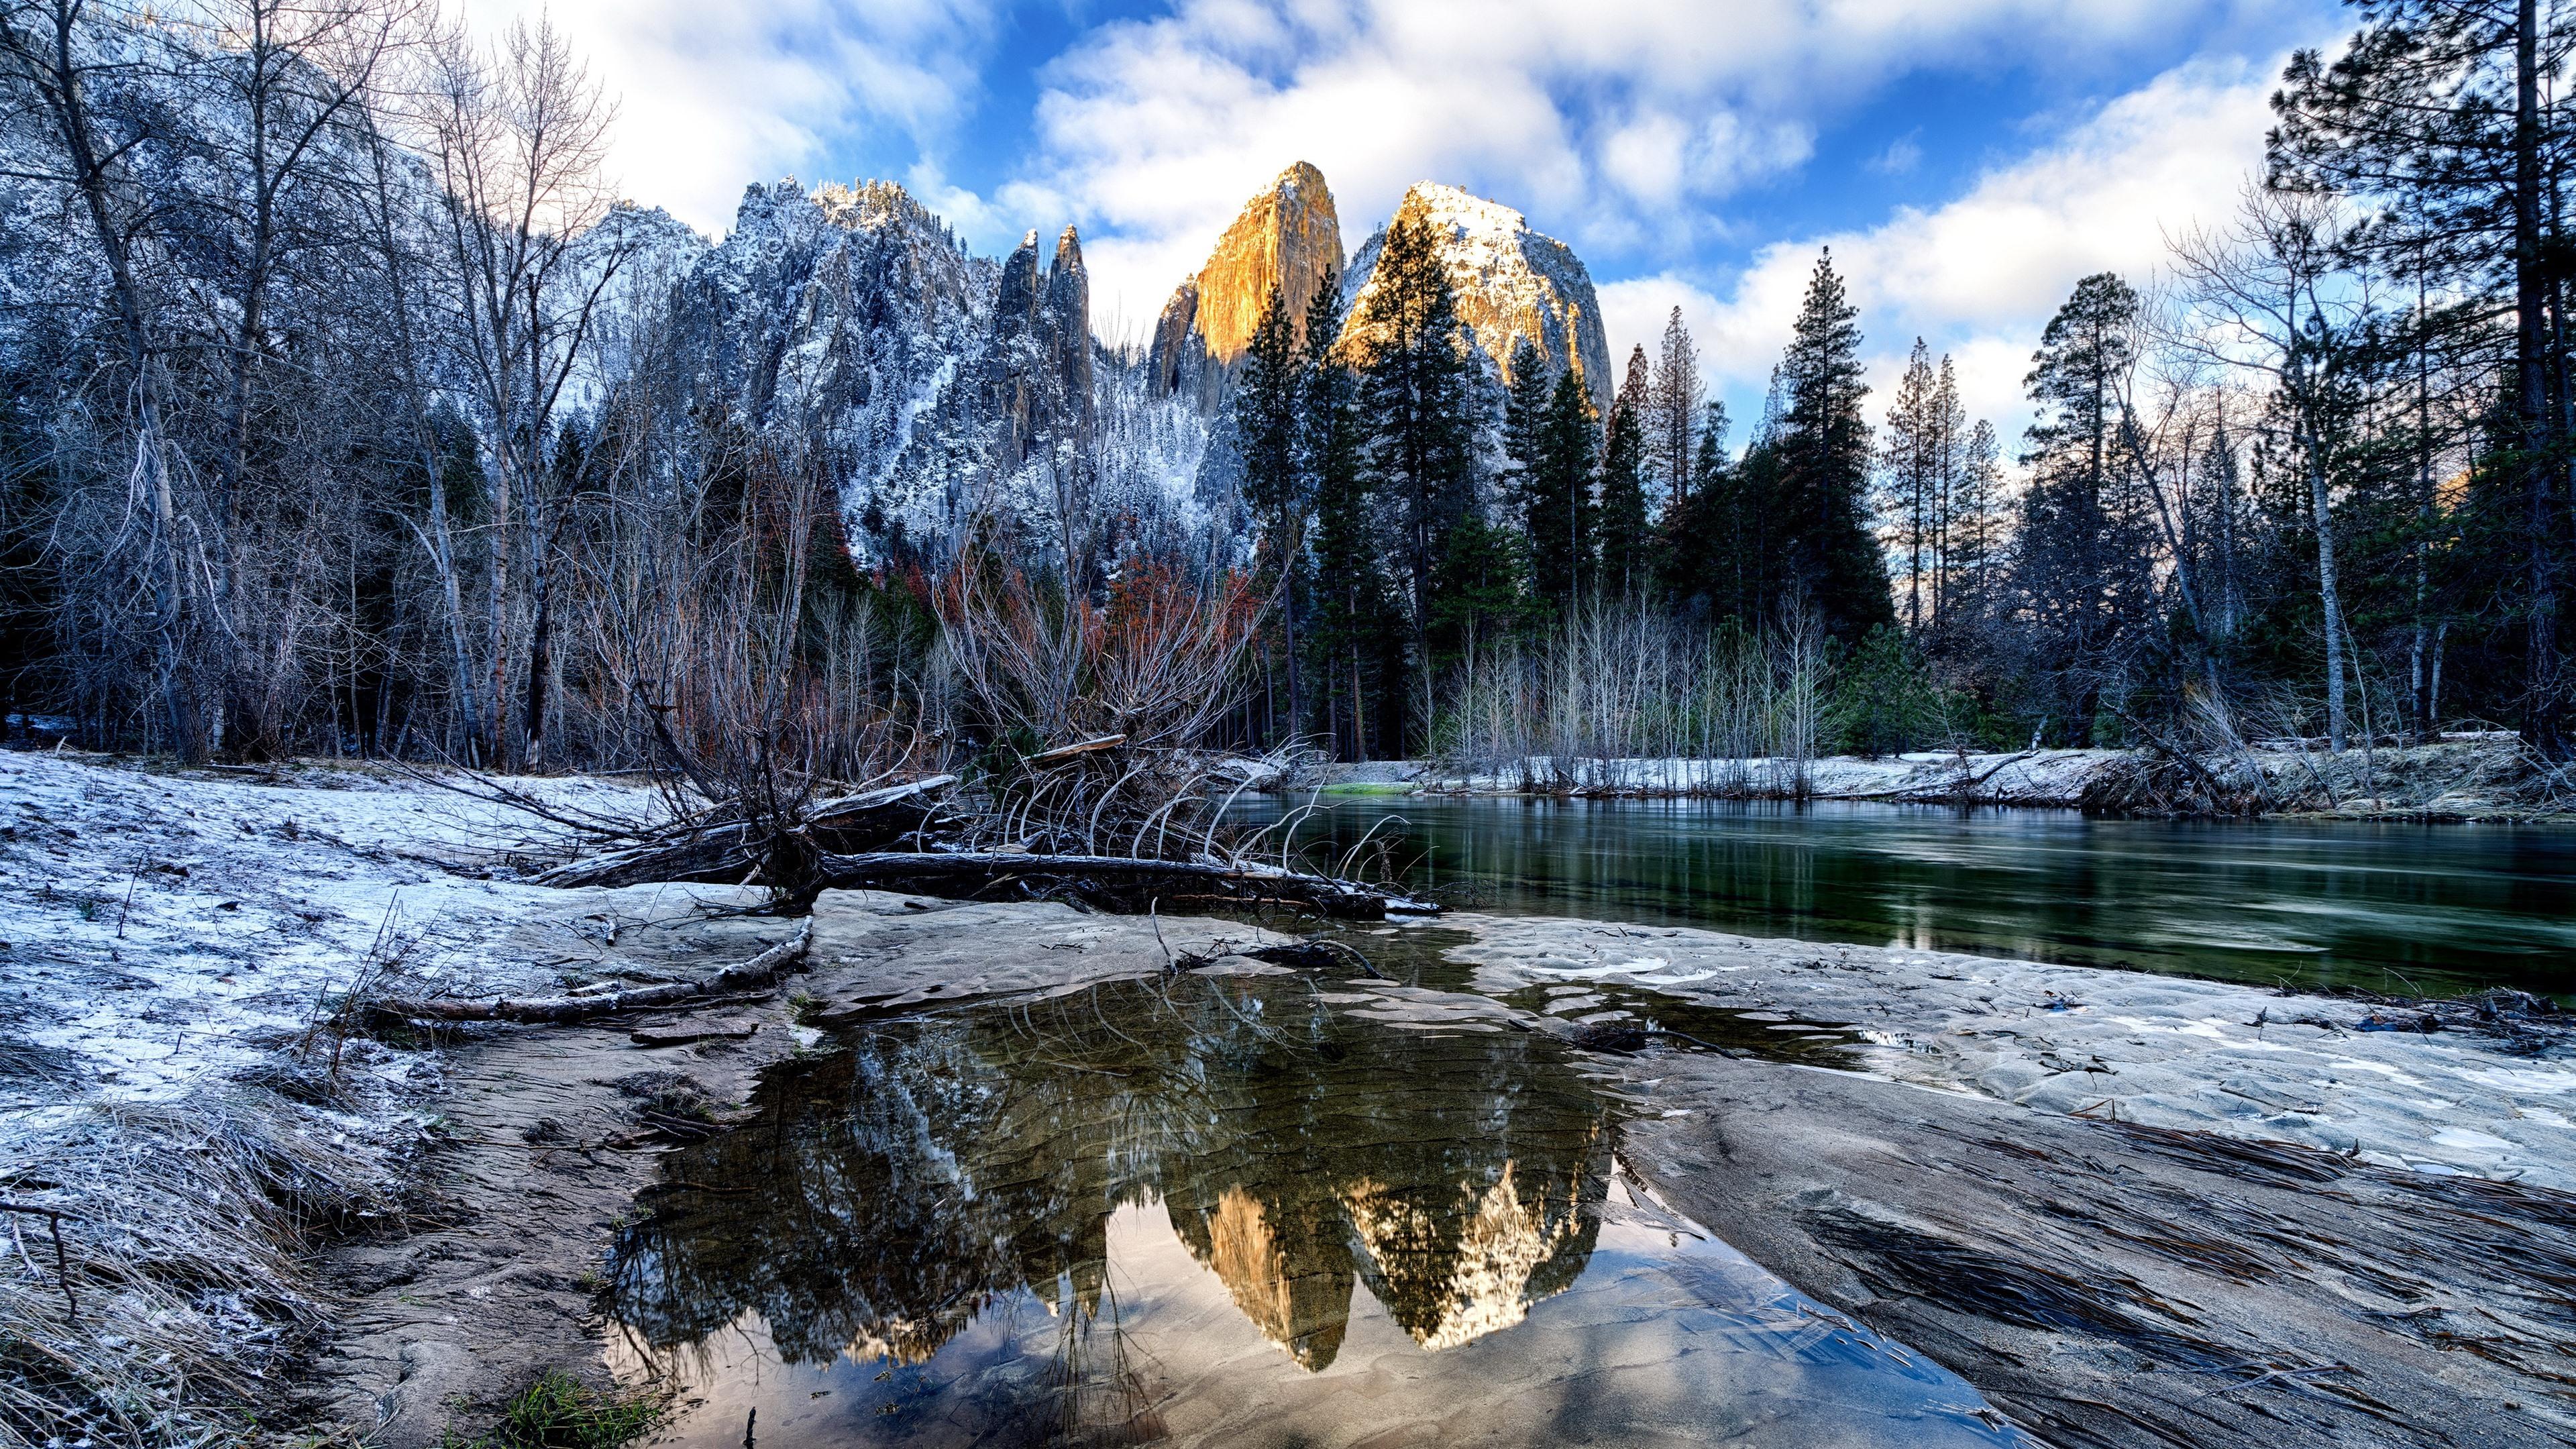 Wallpaper Winter, river, trees, mountains, snow, Yosemite National Park, USA 3840x2160 UHD 4K Picture, Image